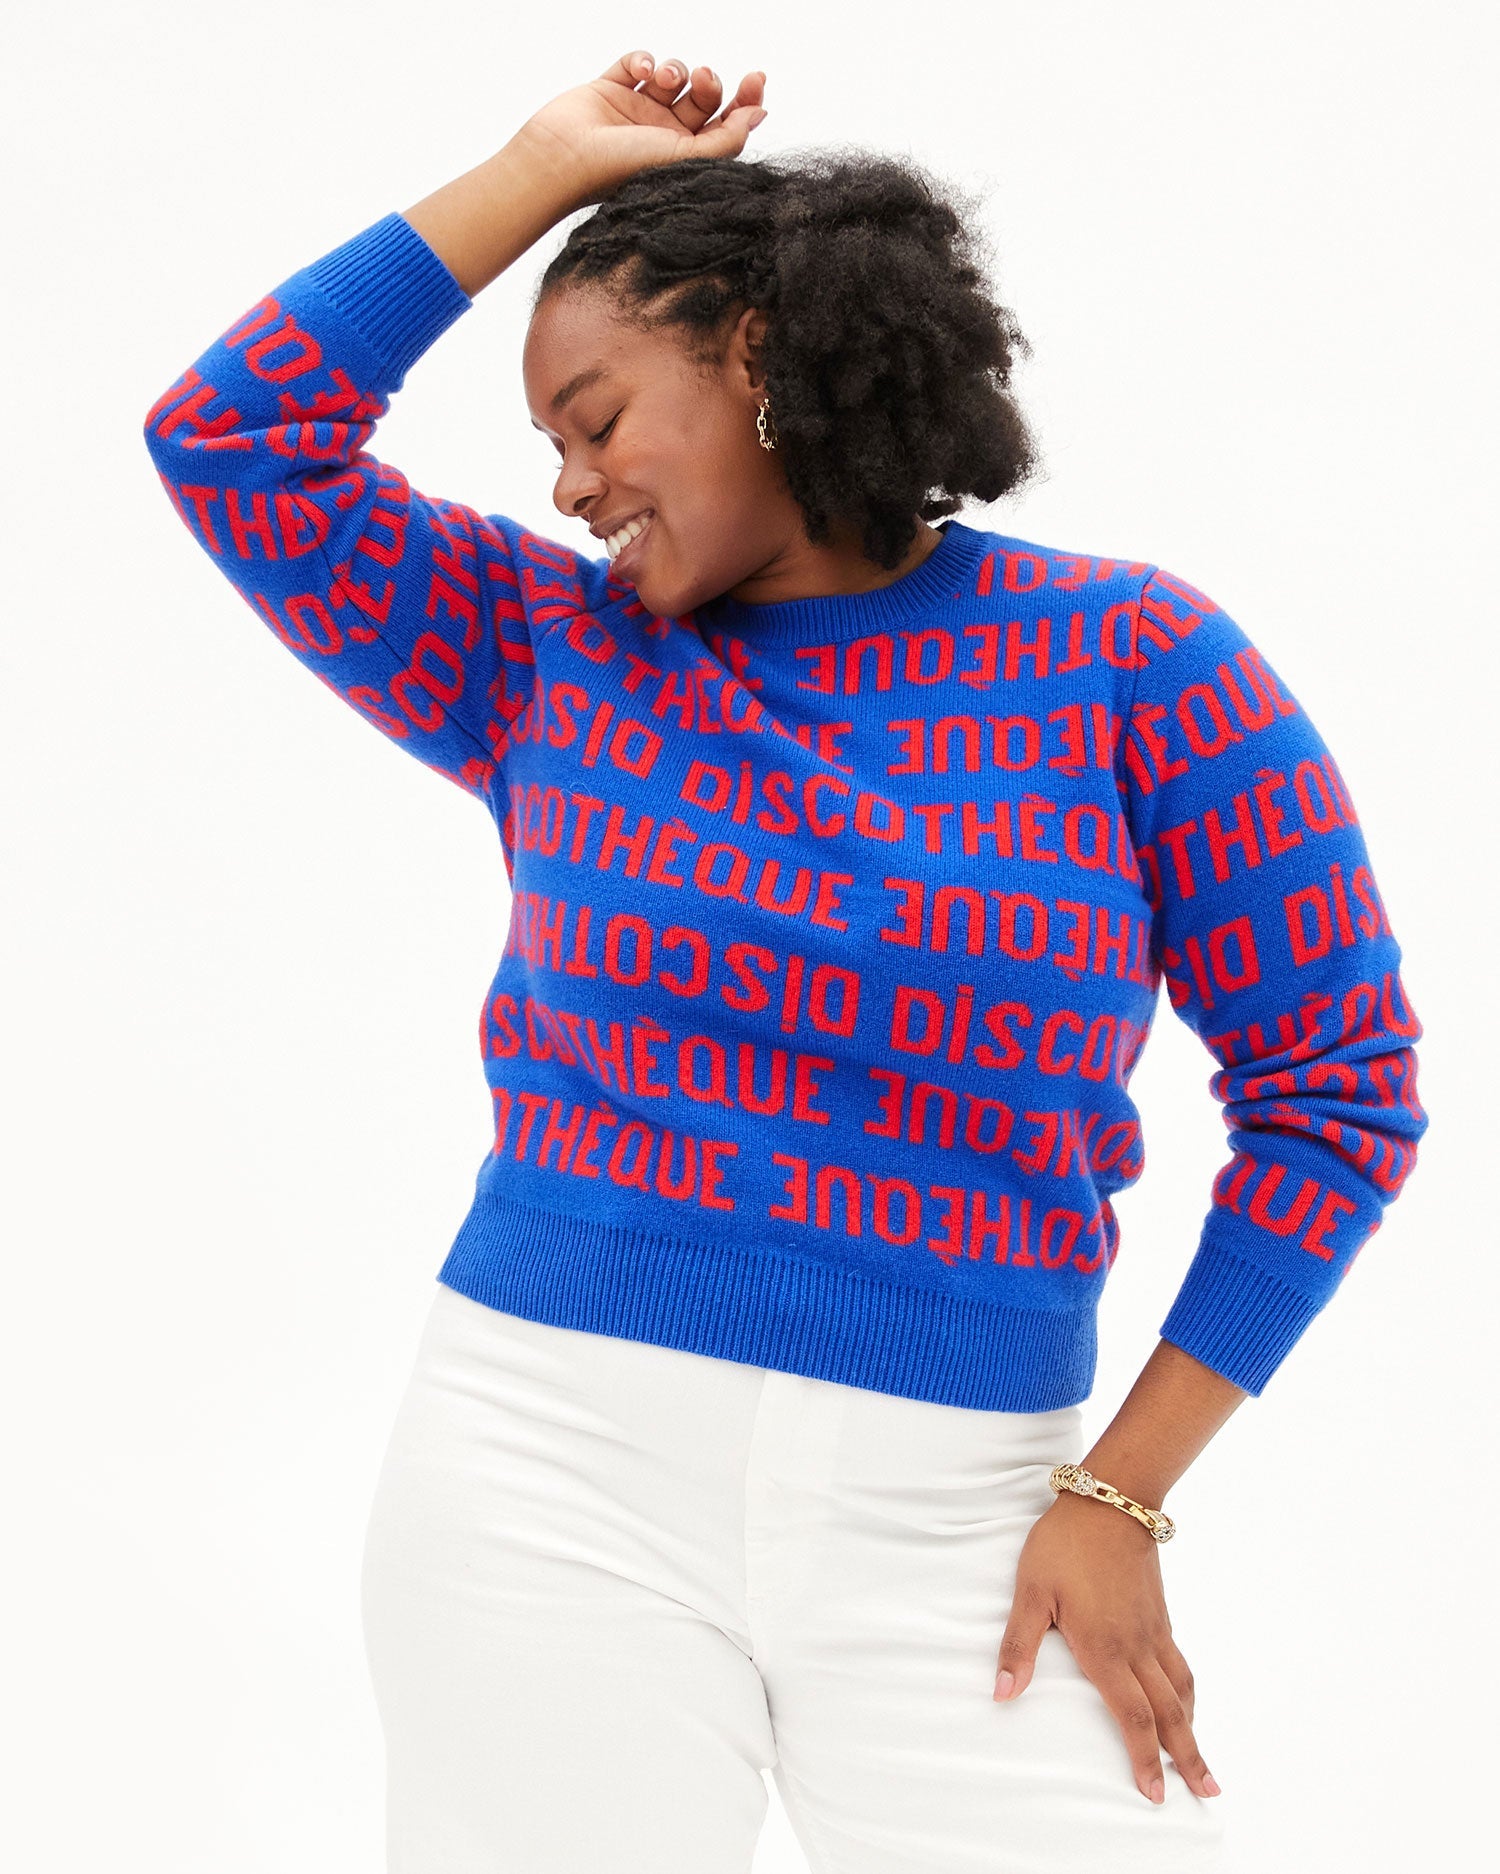 Candace smiling in the Cobalt & Poppy Discotheque Classic Sweater with one of her hands over  her head